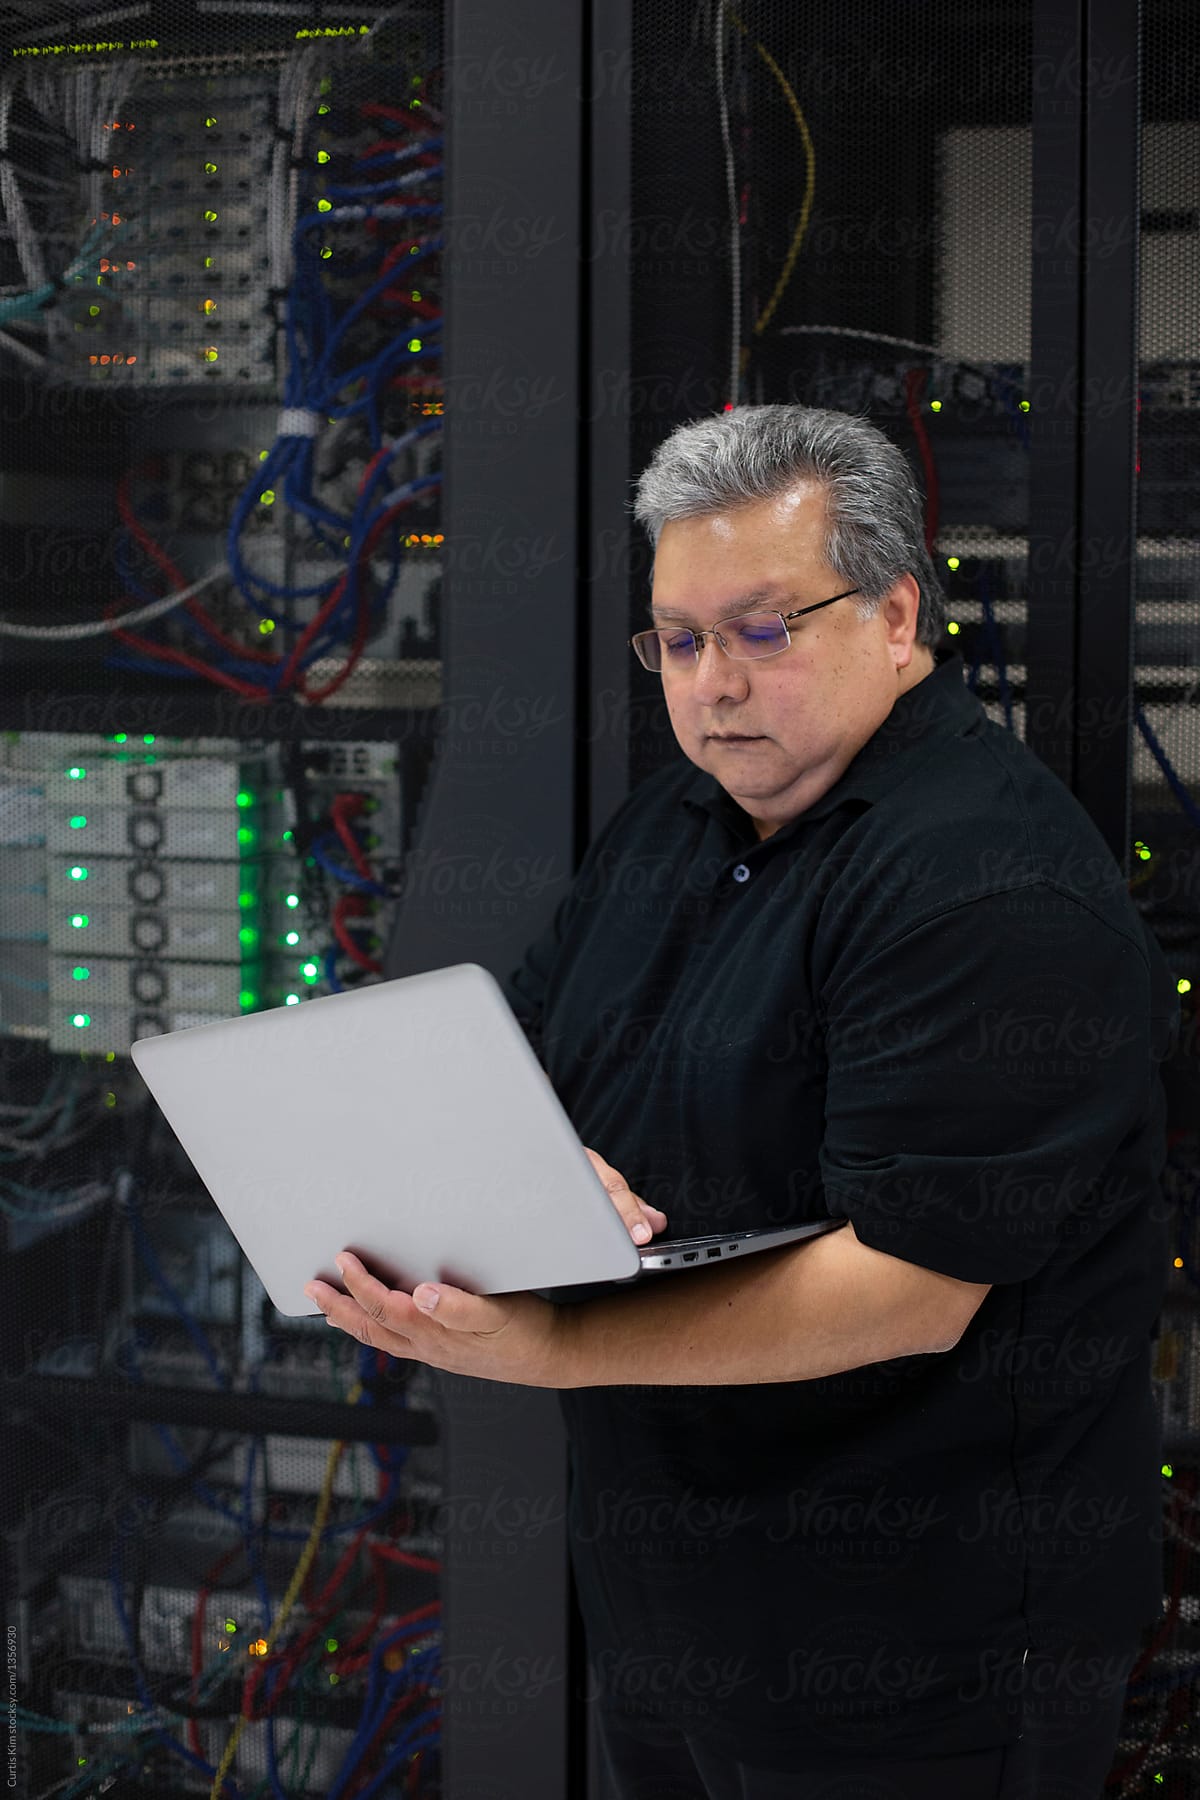 Computer expert working on laptop in data center